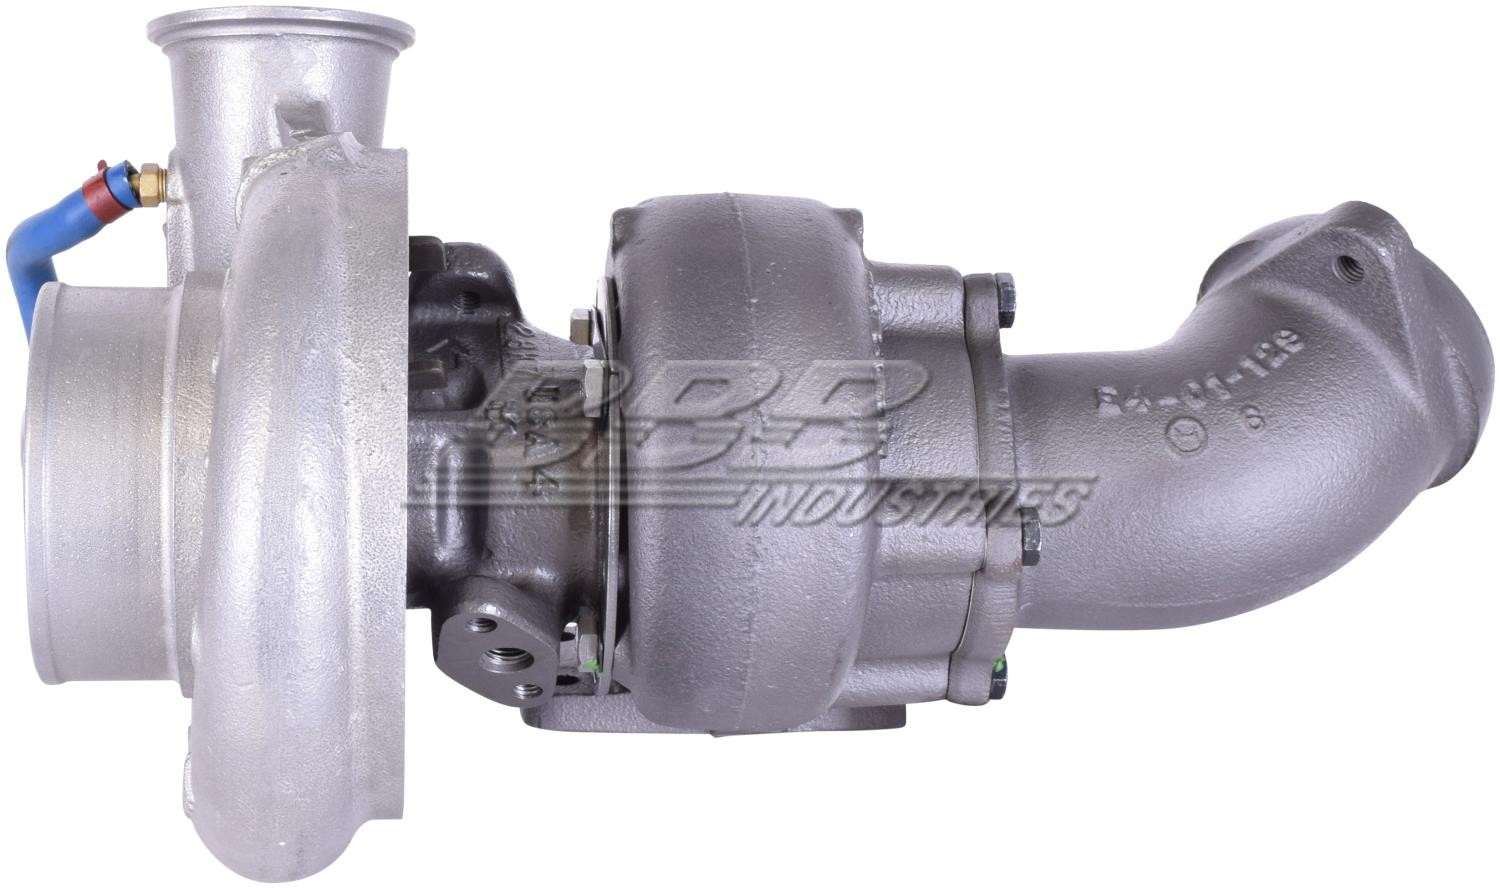 OE-TurboPower Remanufactured Turbocharger  top view frsport D2001